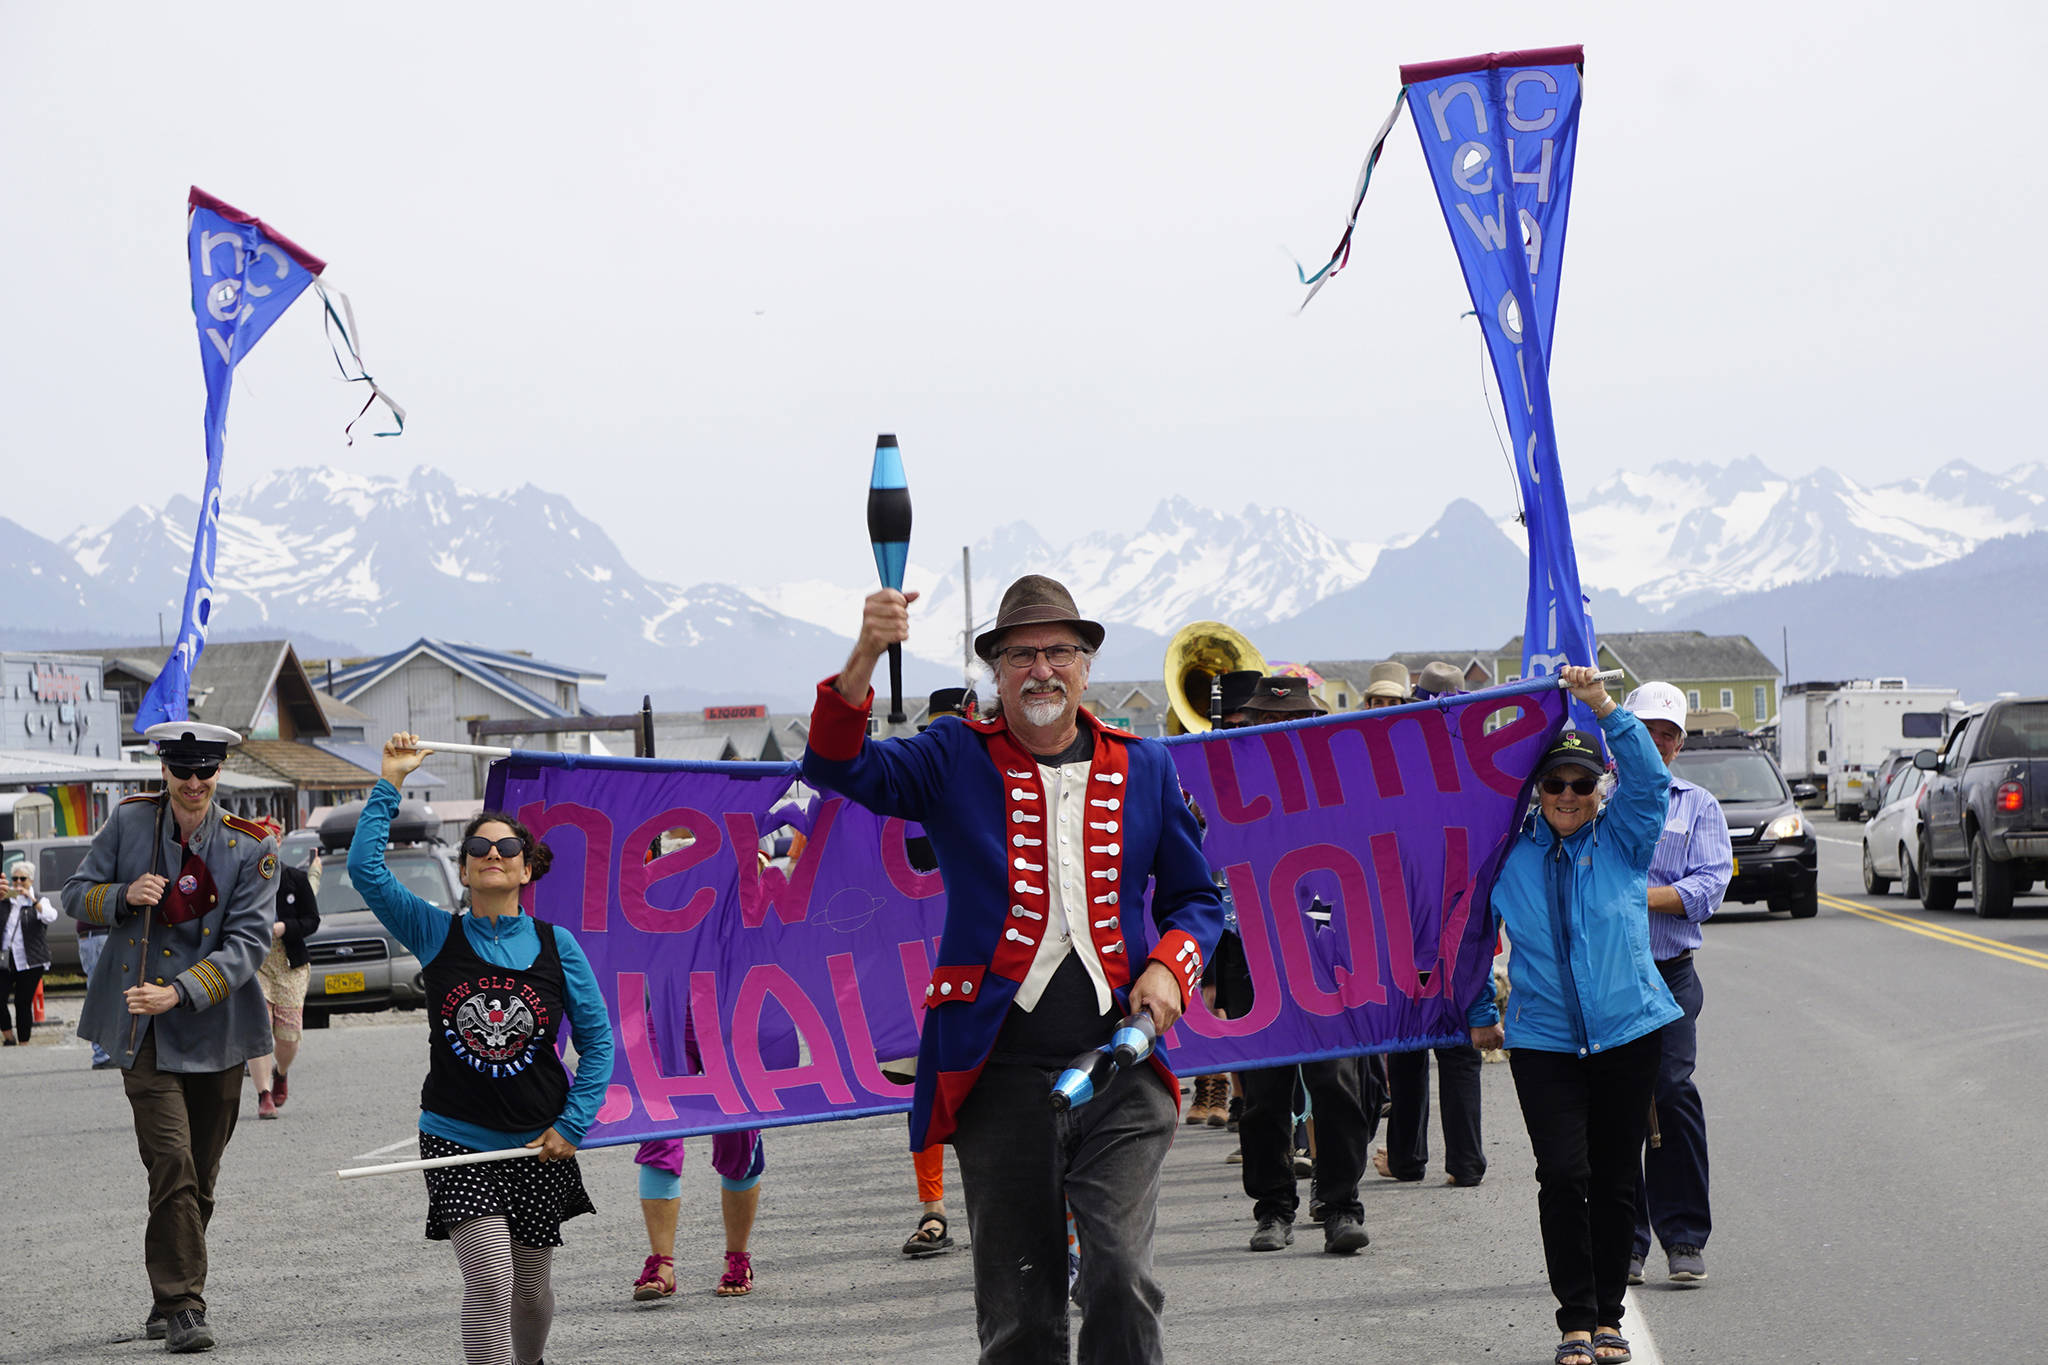 The New Old Time Chautauqua Fighting Instruments of Karma Marching Chamber Band Orchestra marches on the Homer Spit on July 2, 2019, in Homer, Alaska. The group visited Homer as part of a week-long tour partially funded by the Rasmuson Foundation’s Harper Arts Touring Fund, administered by the Alaska State Council on the Arts — an example of state-foundation cooperation in arts funding. (Photo by Michael Armstrong/Homer News)